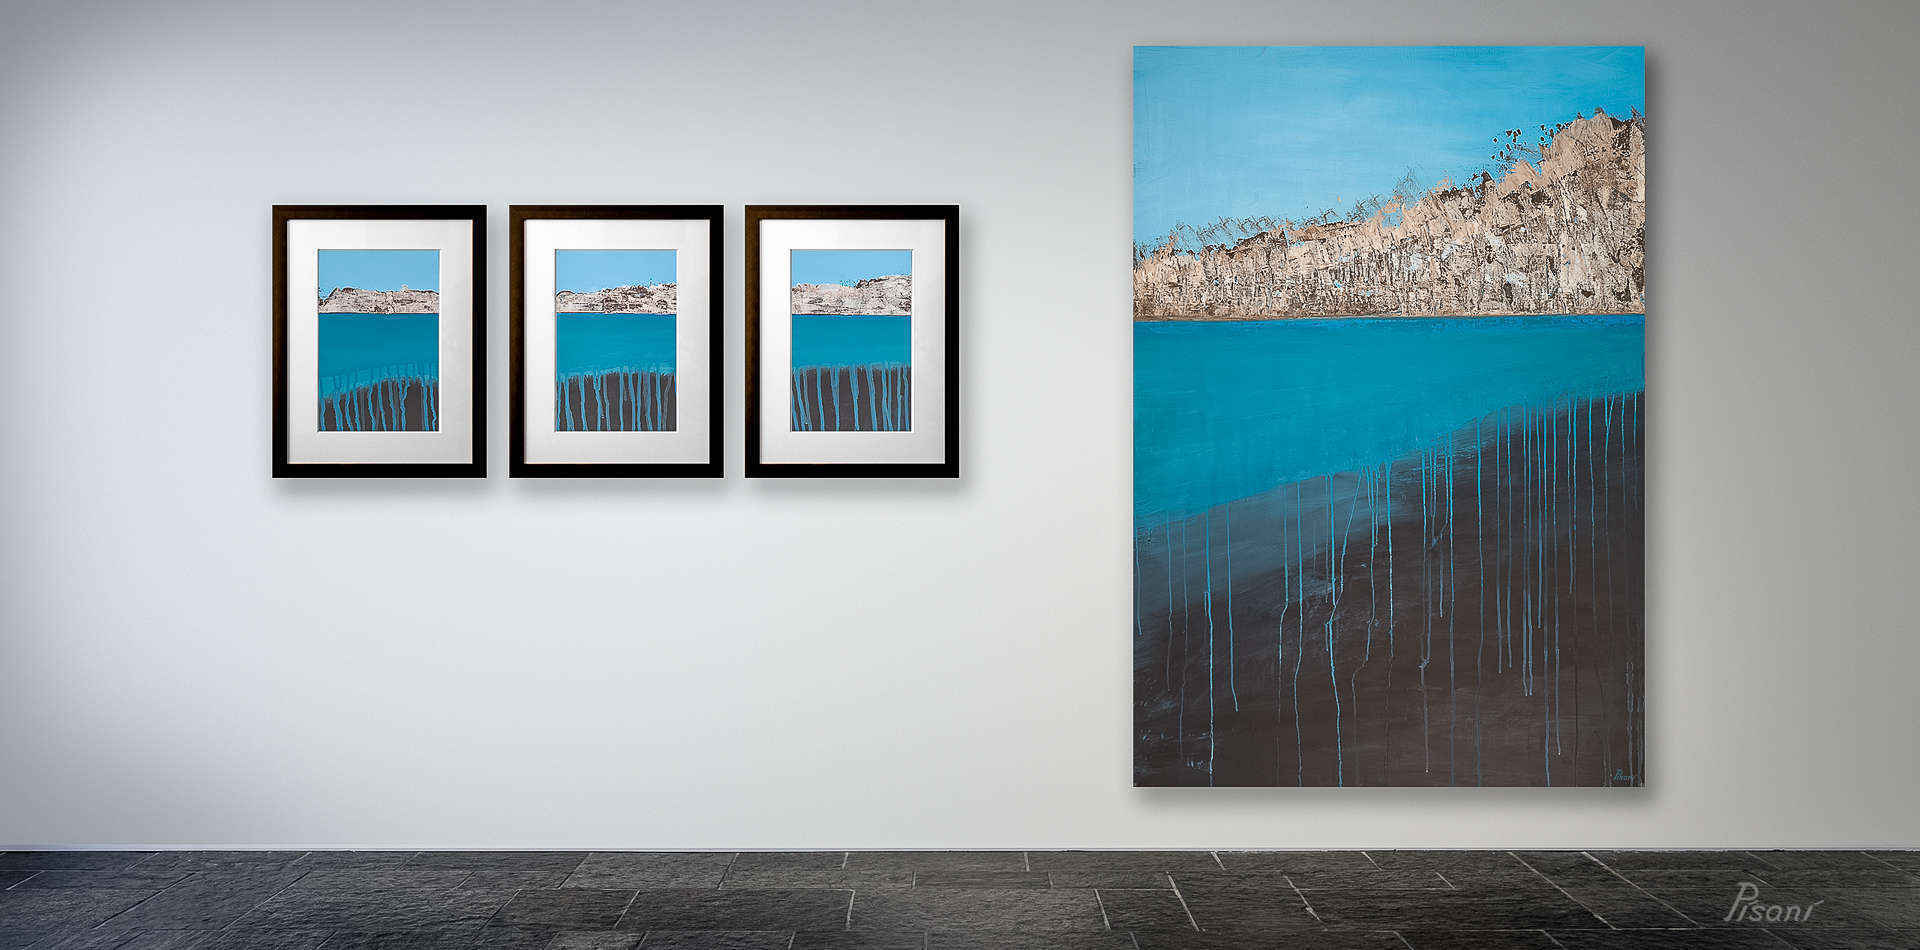 Gallery view of abstract landscape paintings by Contemporary Artist Pisani